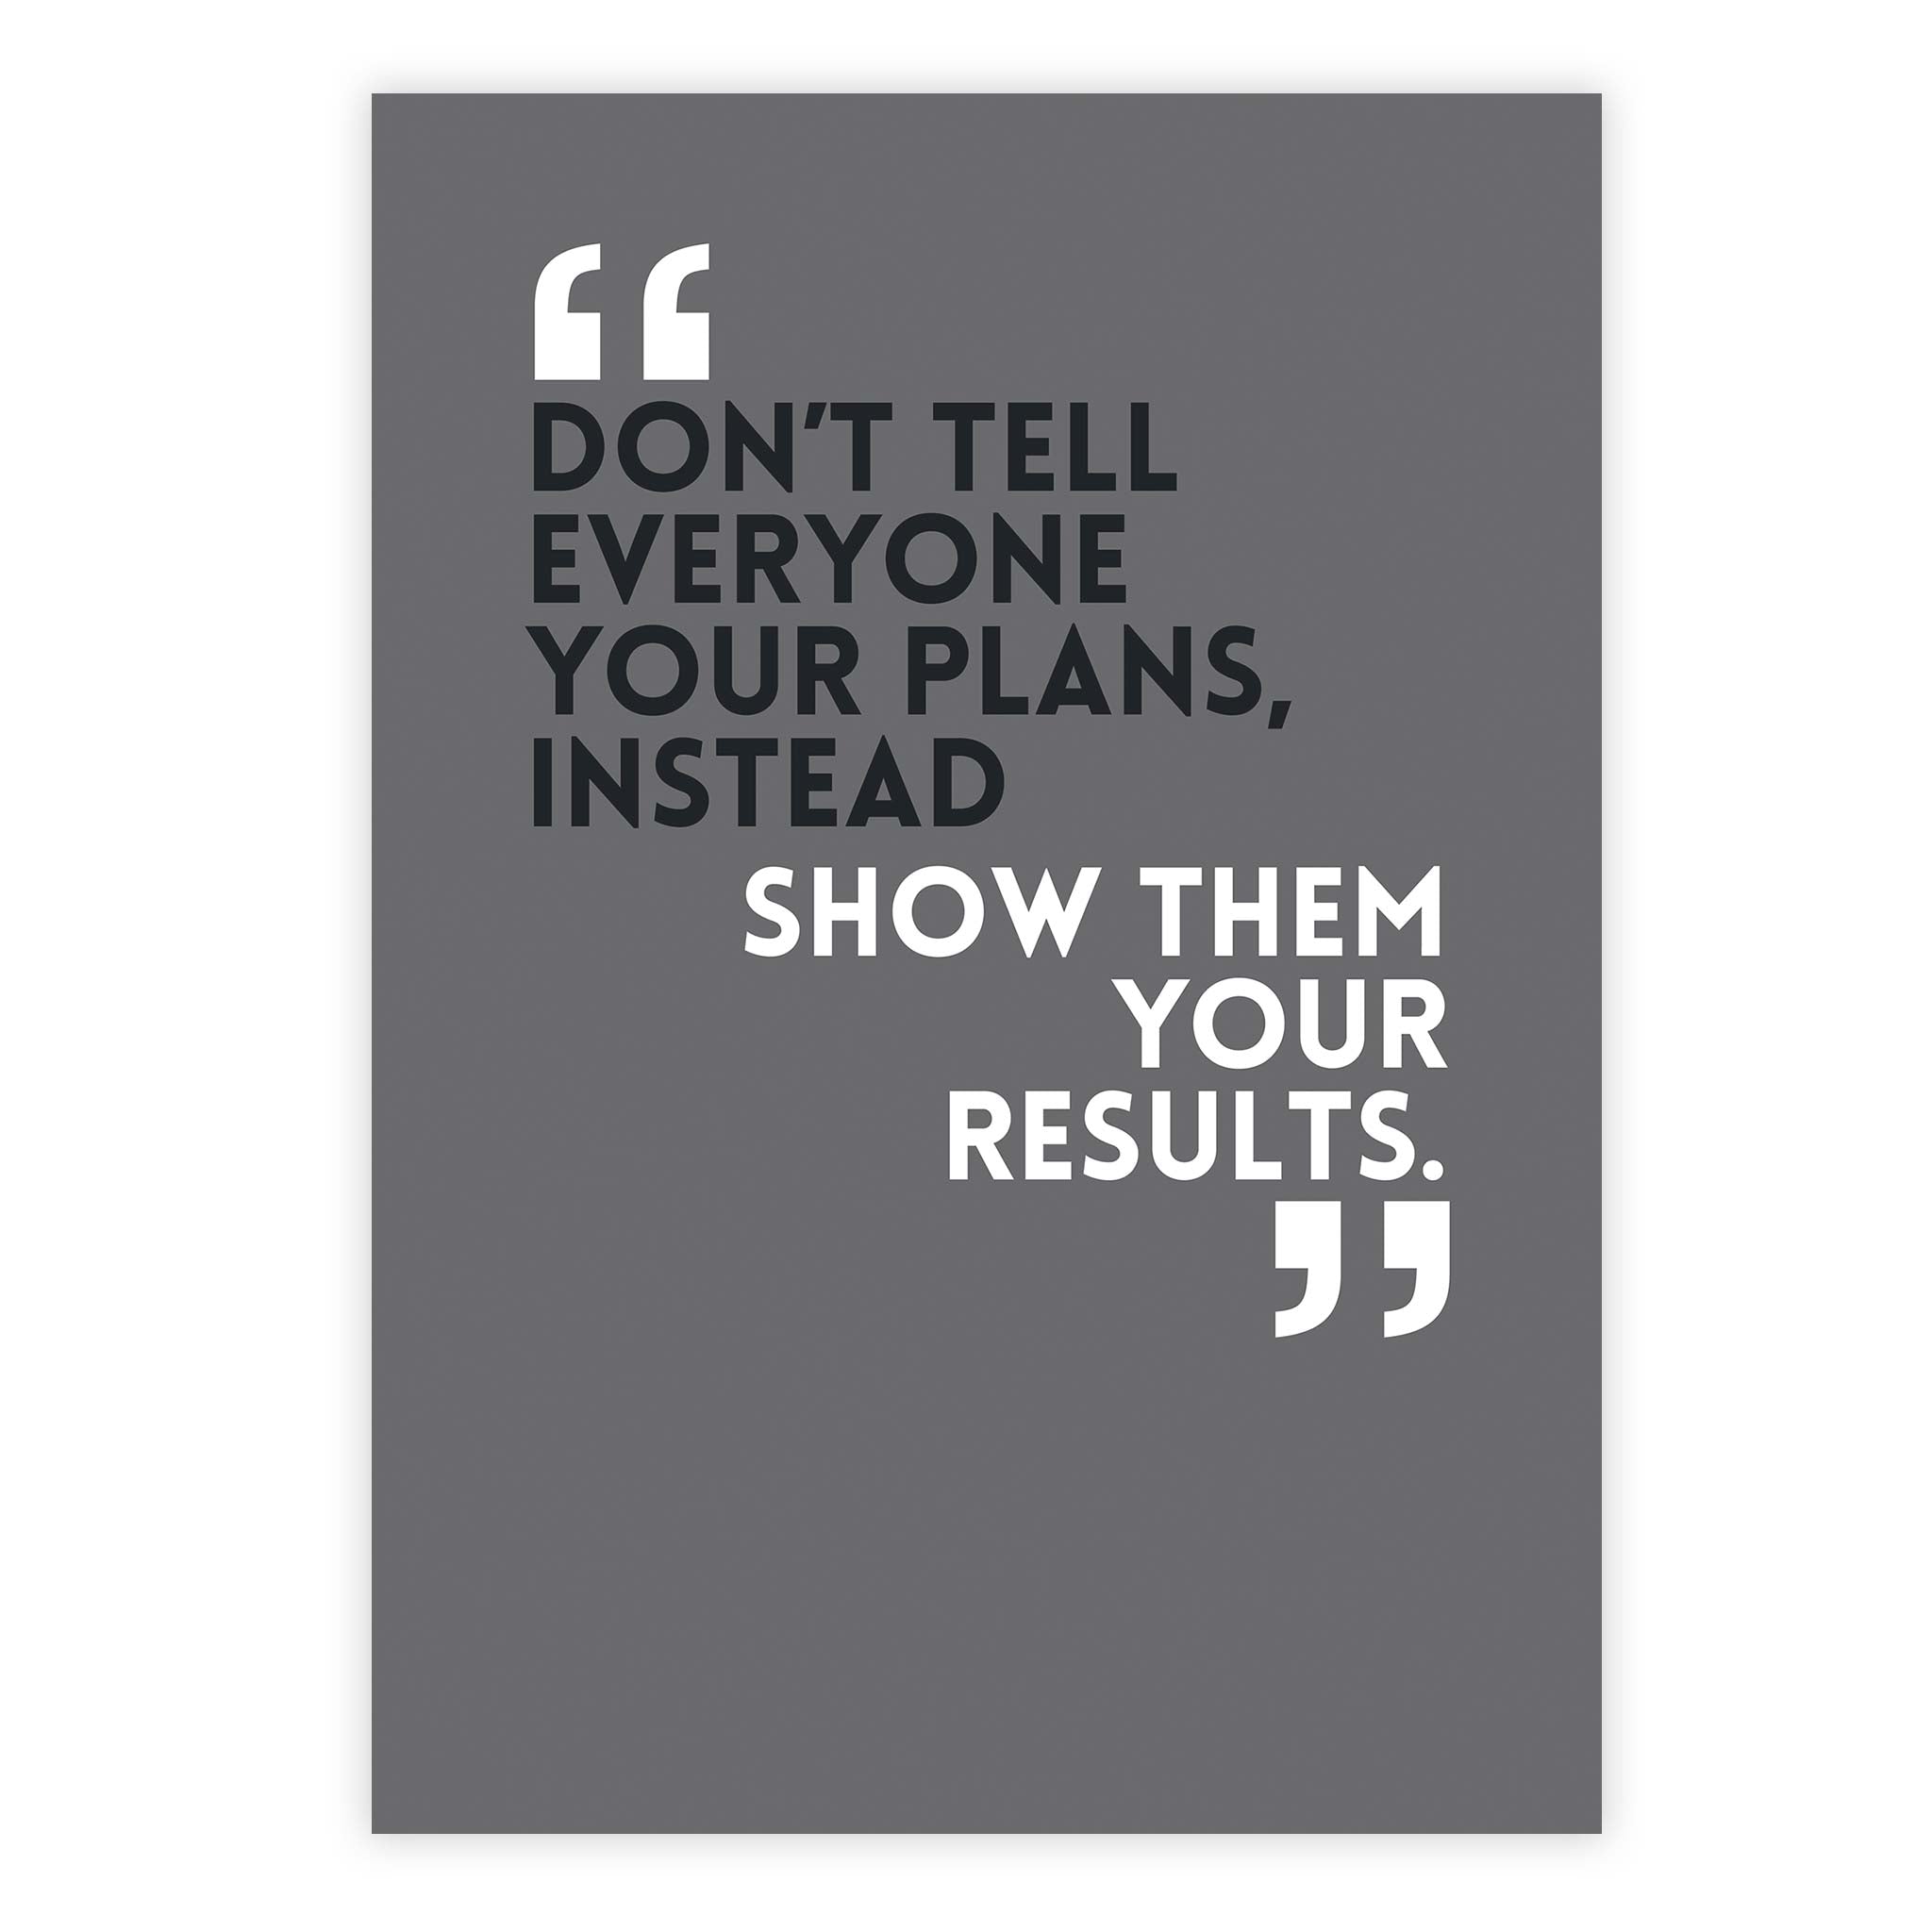 Don’t tell everyone your plans, instead show them your results